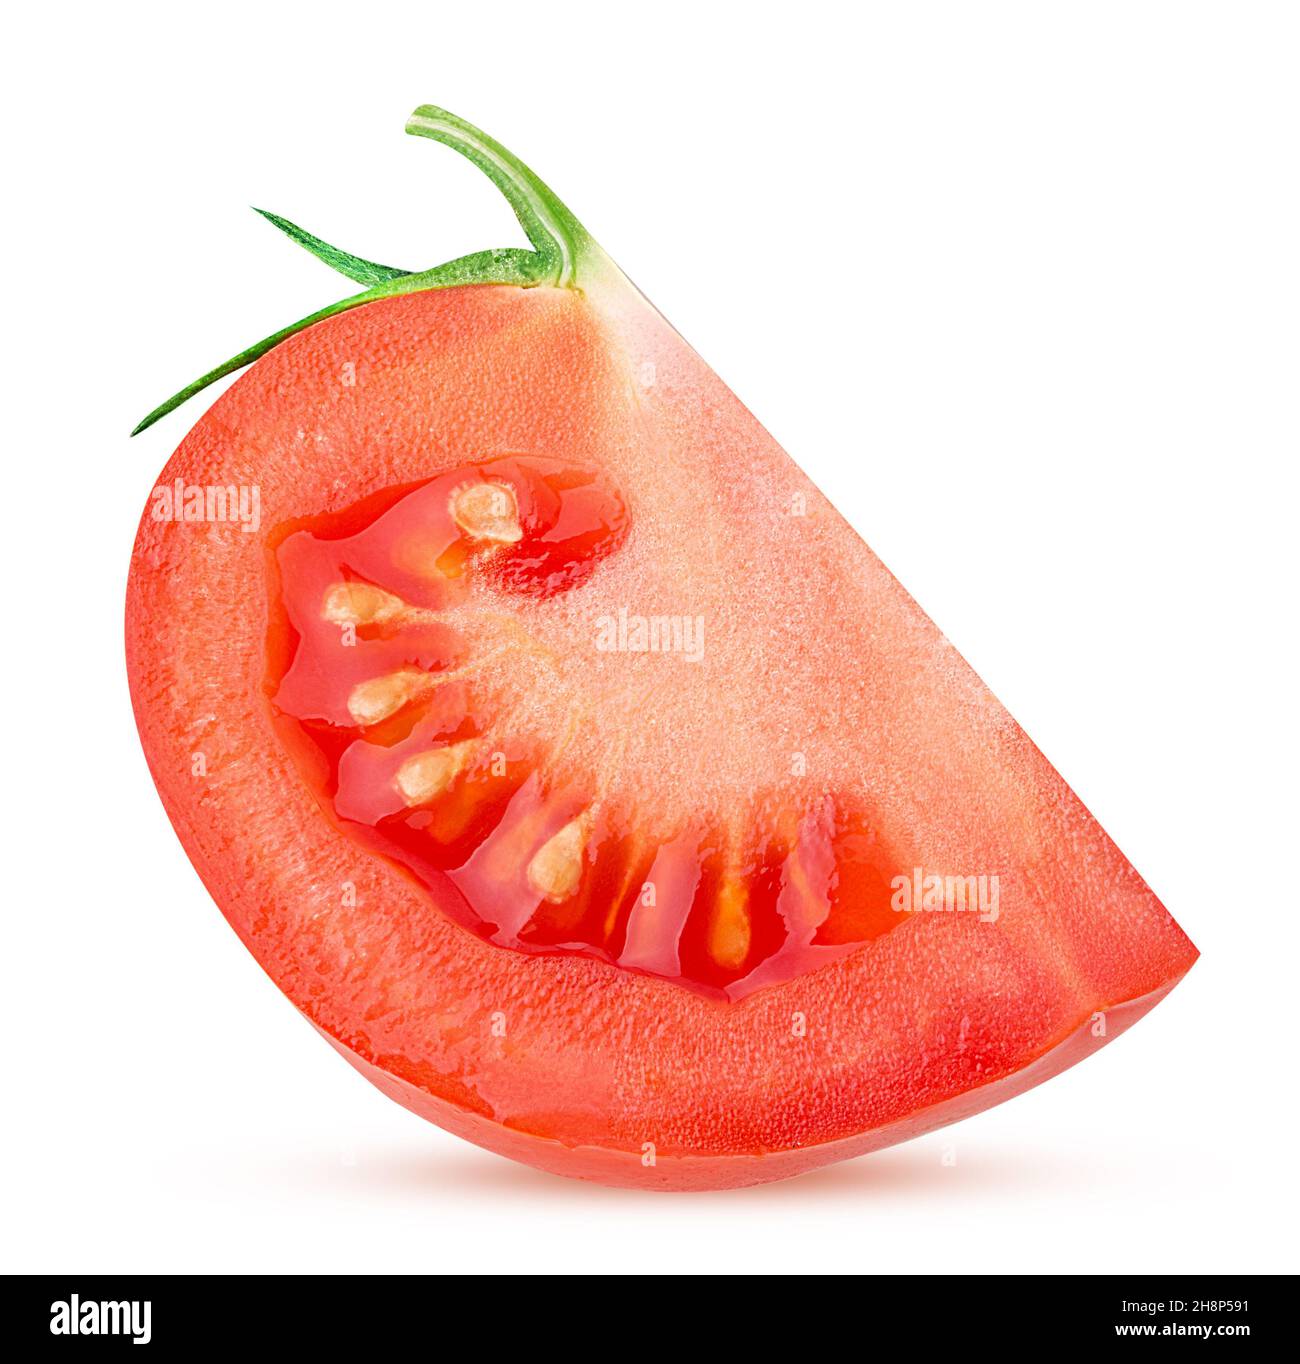 Fresh red tomato slice with green leaves isolated on white background Clipping Path. Full depth of field. Stock Photo